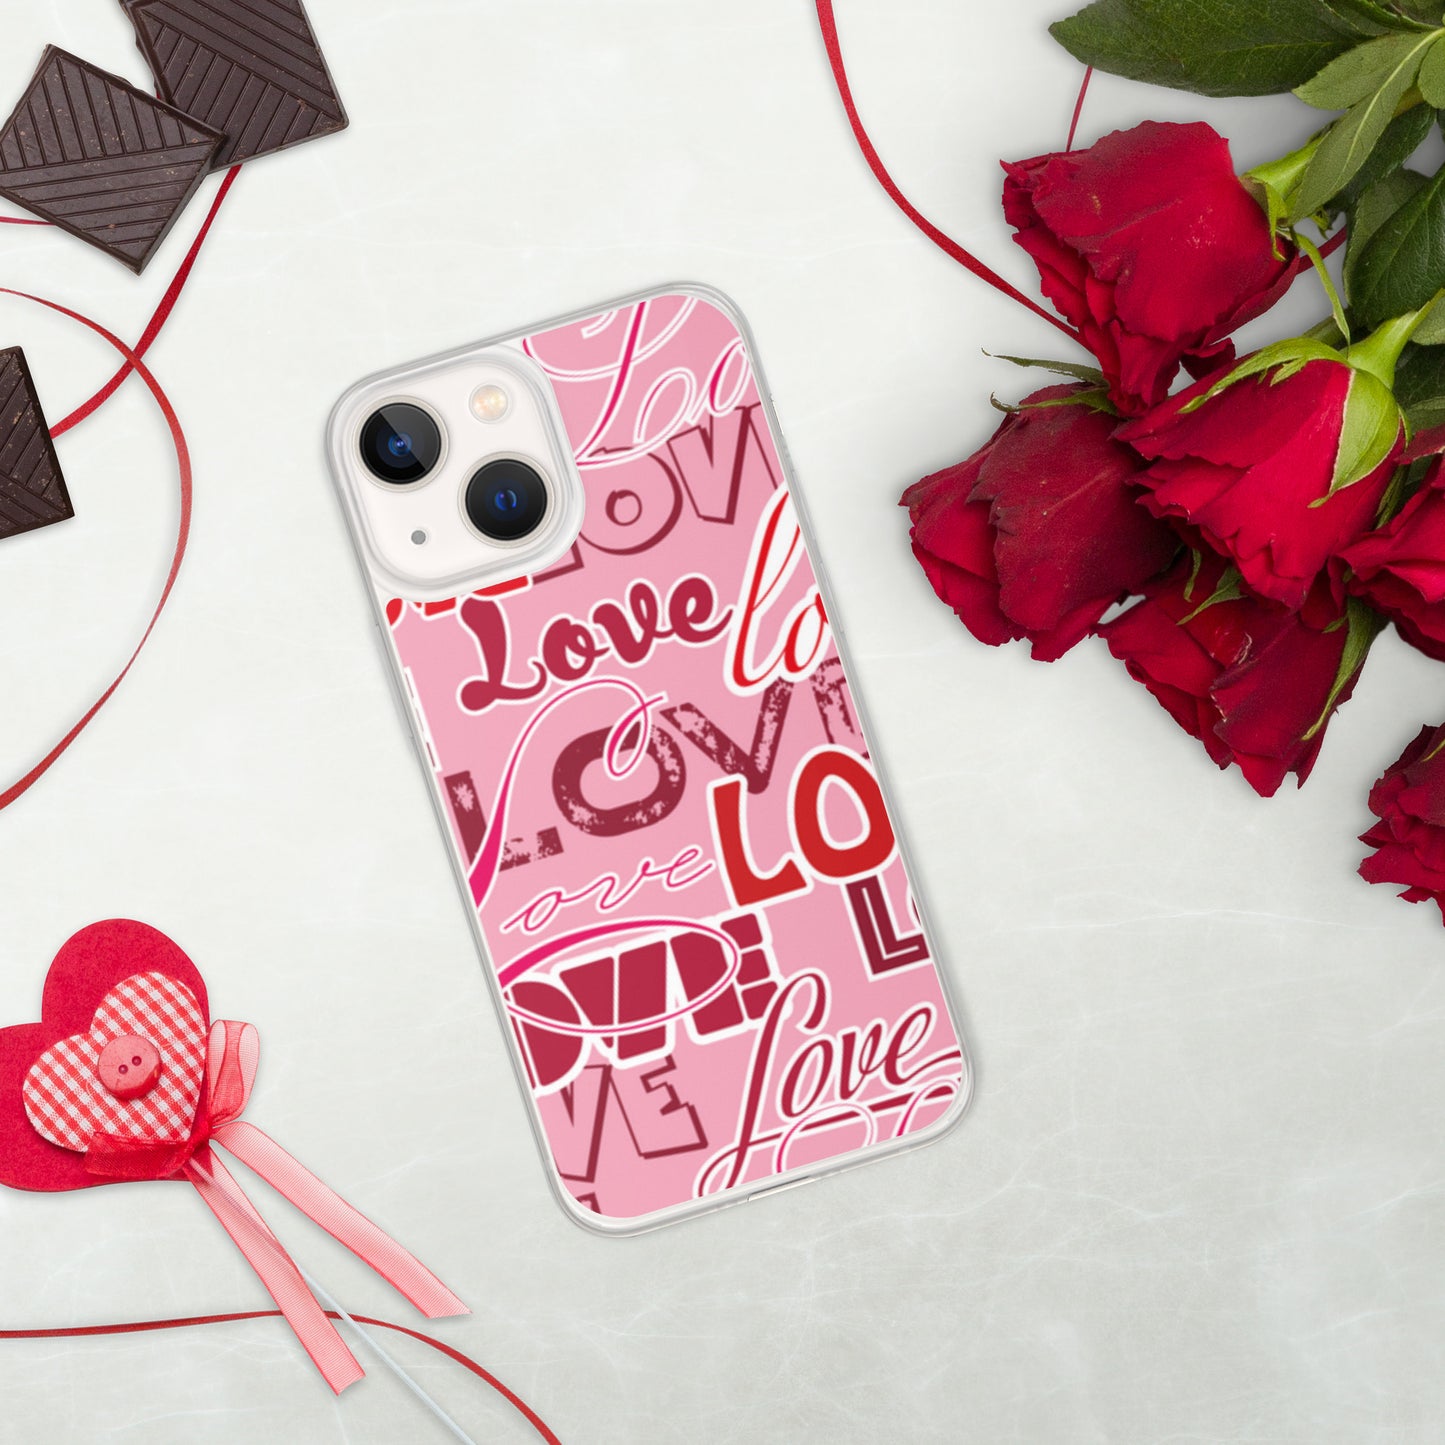 Beautiful Love Themed iPhone Case